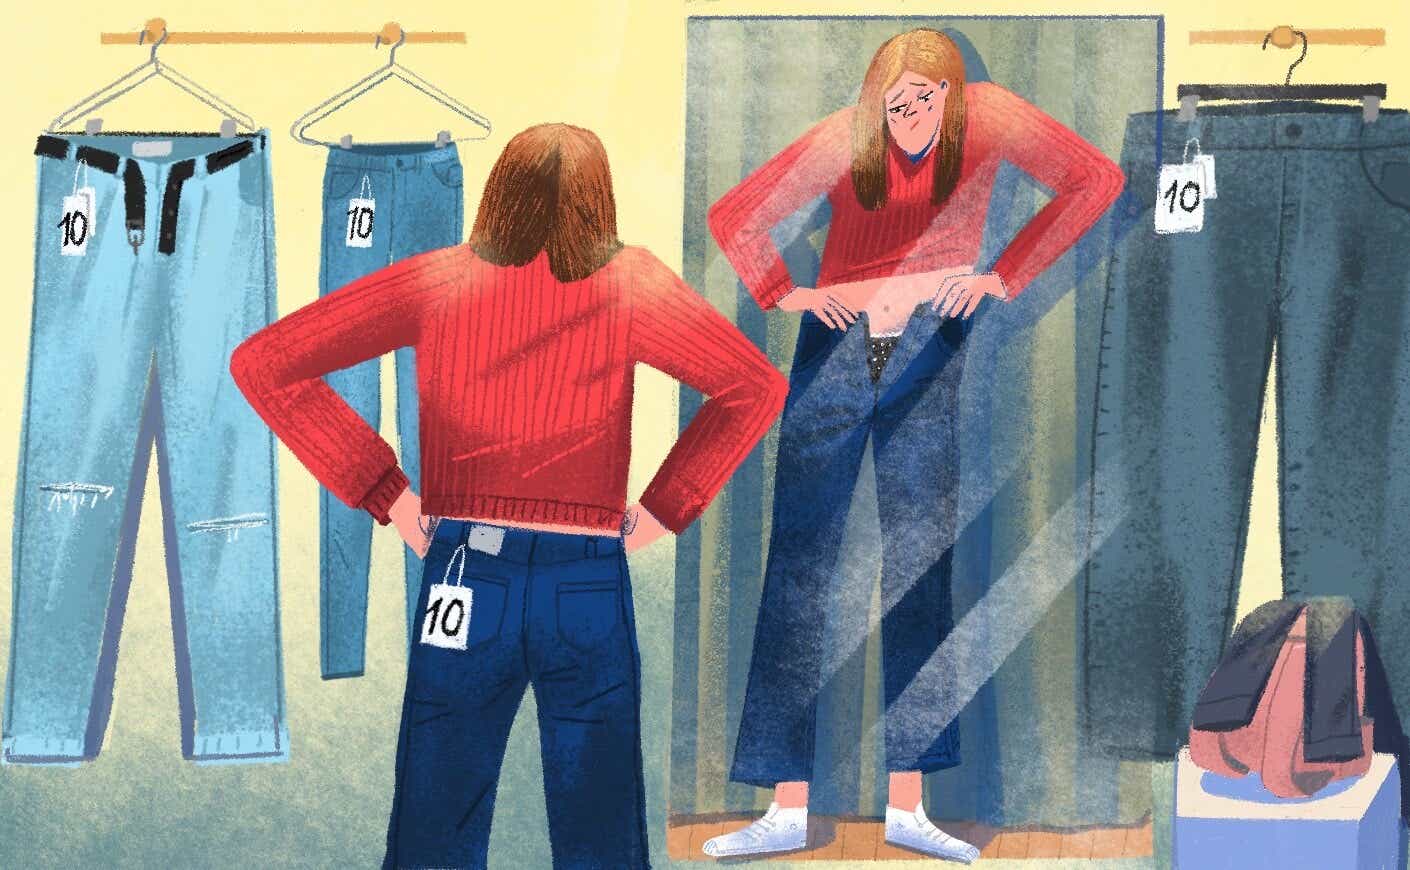 Clothing sizes getting bigger: Why our sizing system makes no sense.